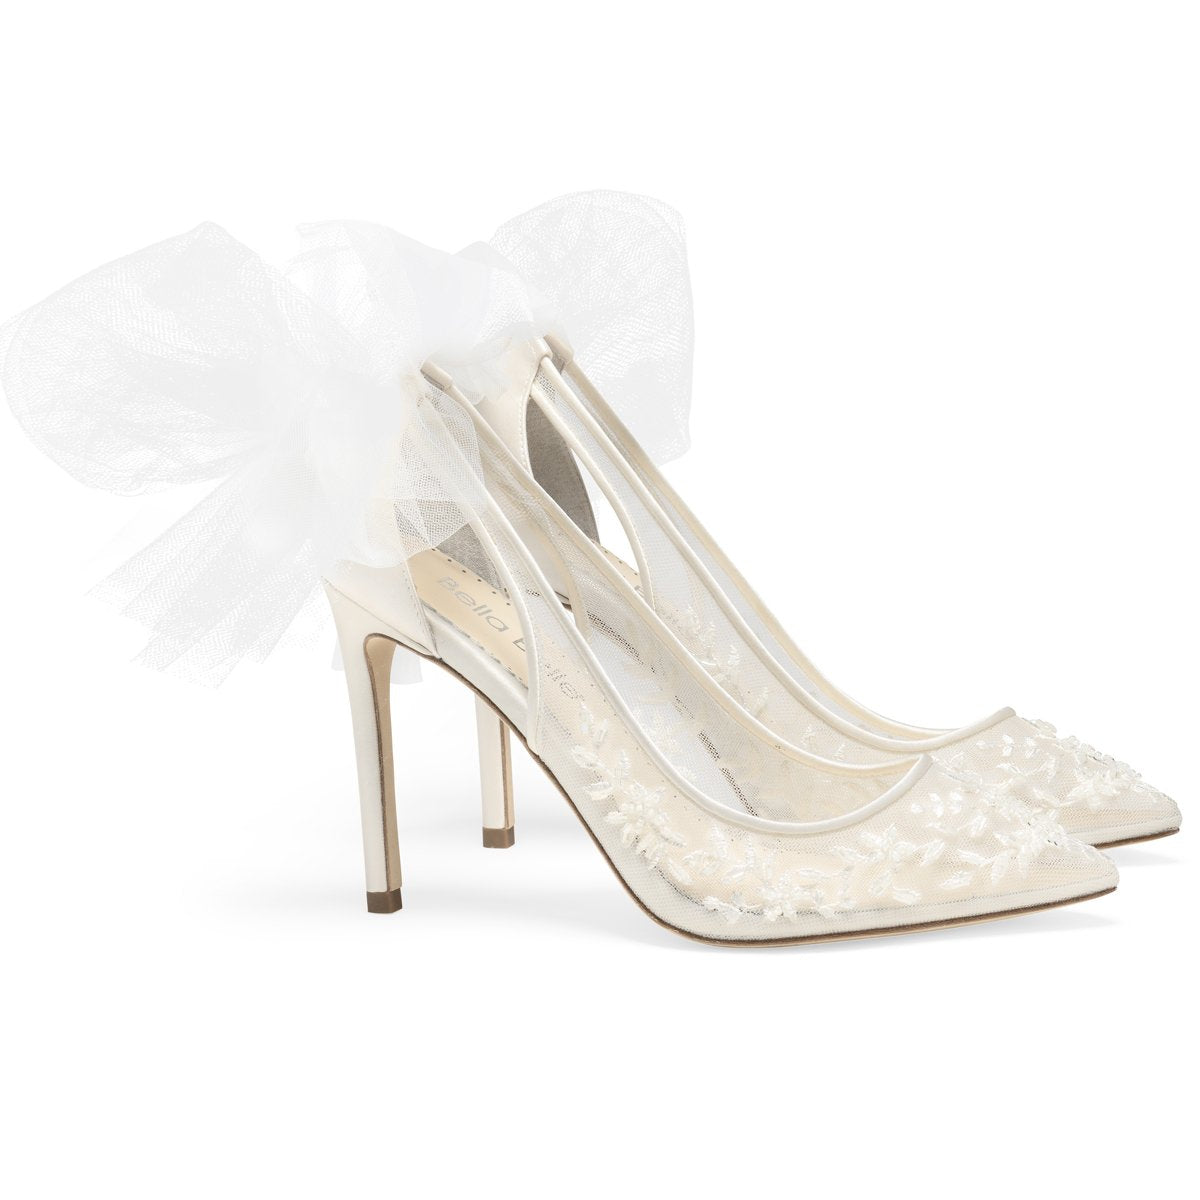 Edna - Floral and Tulle Bow Pump